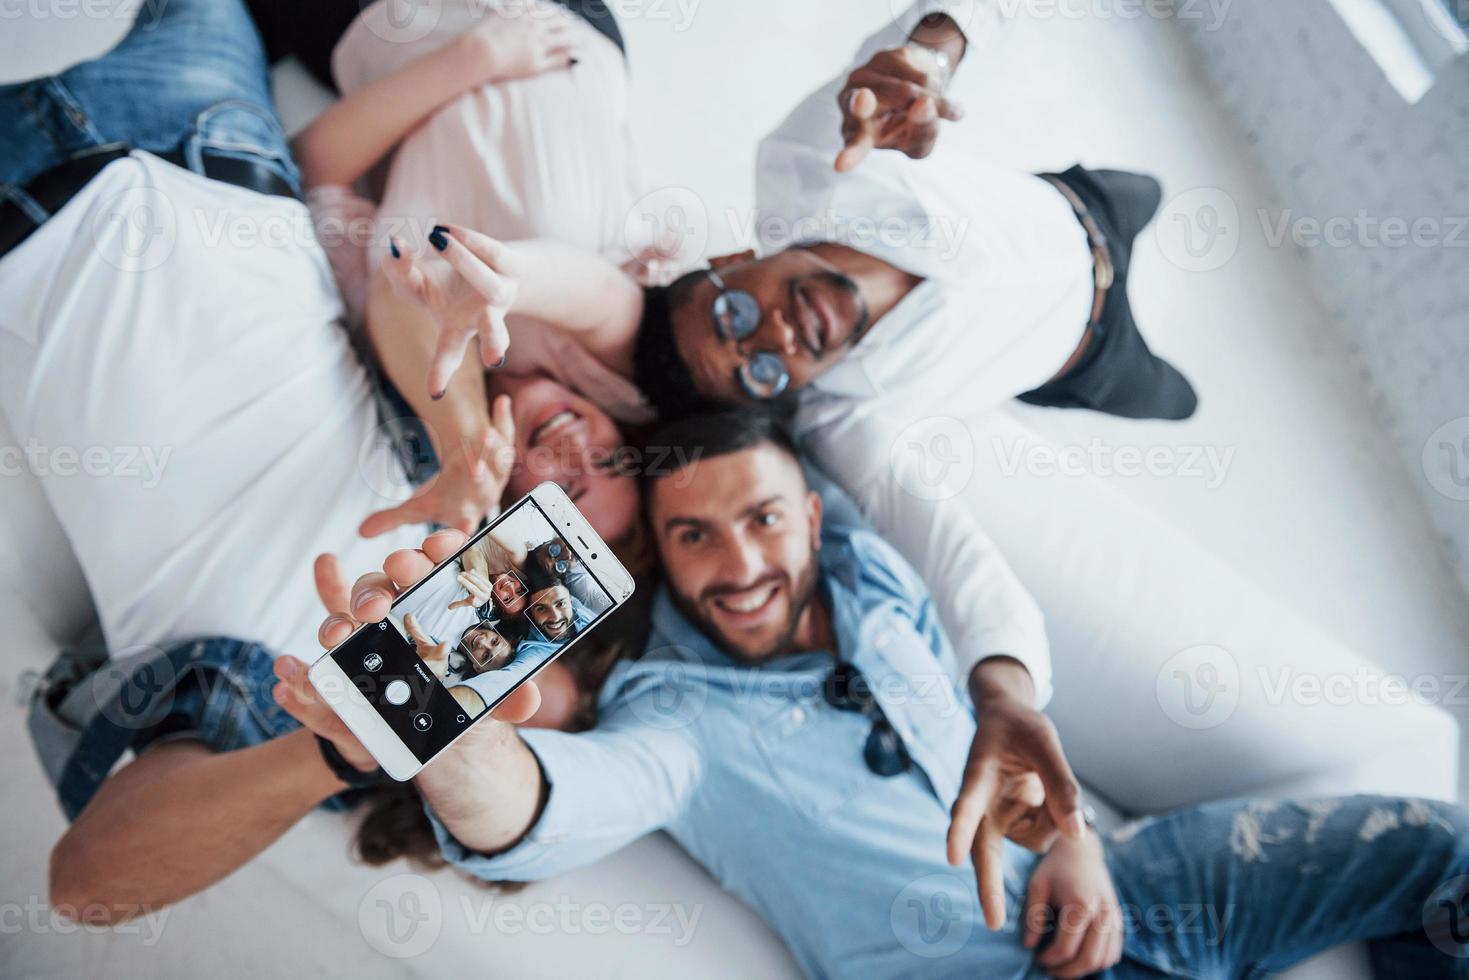 Lifting up the arms. Young people laying down and take a selfie with focus on the phone photo